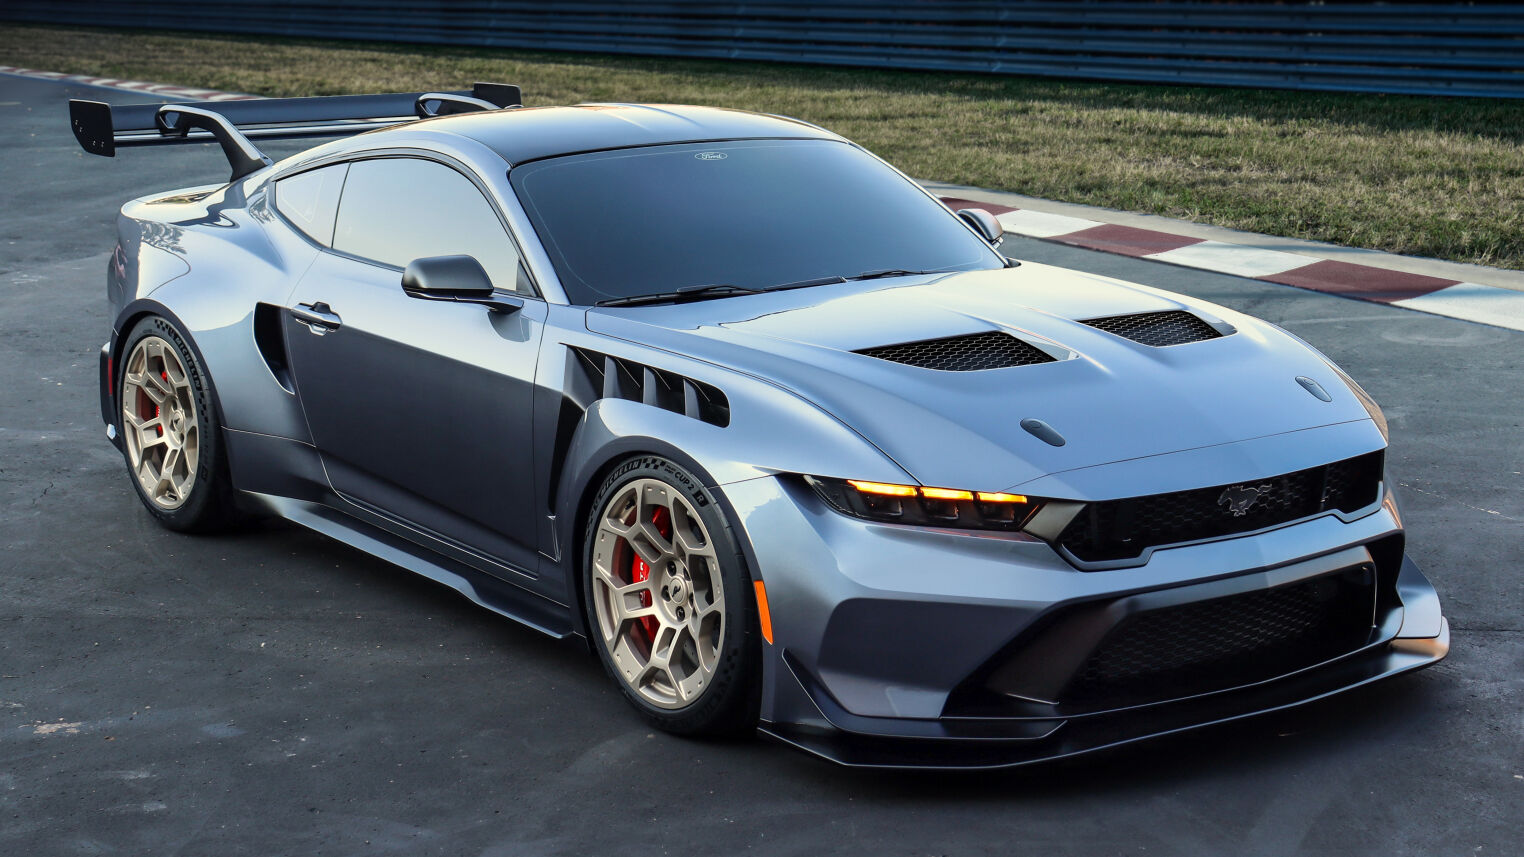 2025 Ford Mustang GTD costs about $325,000, applications to order open